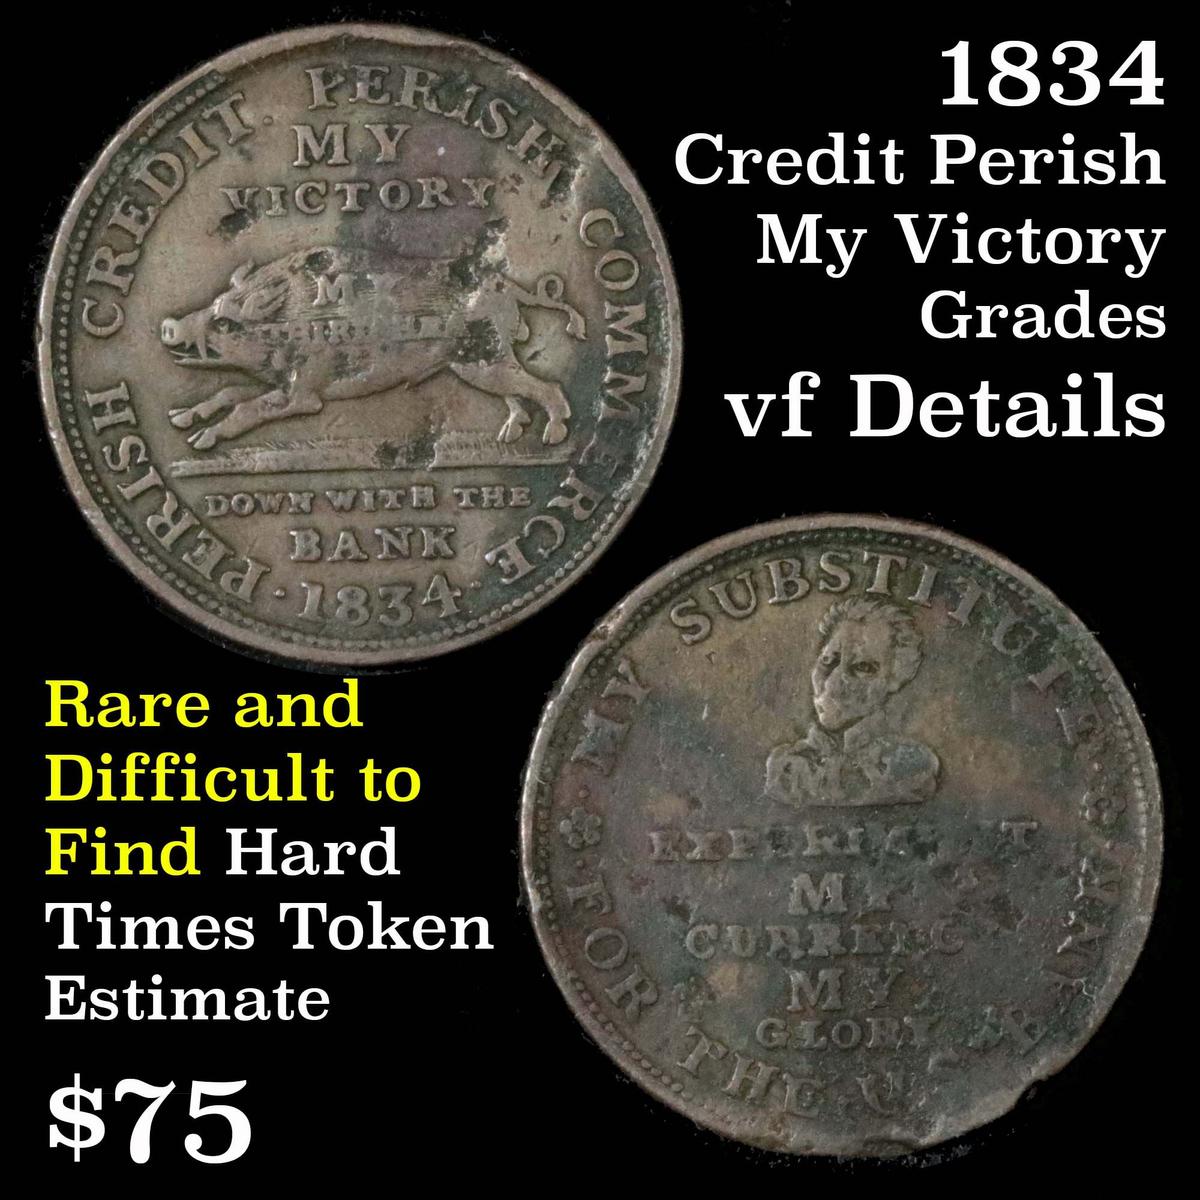 1834 Hard Times Token Grades vf details Difficult to find